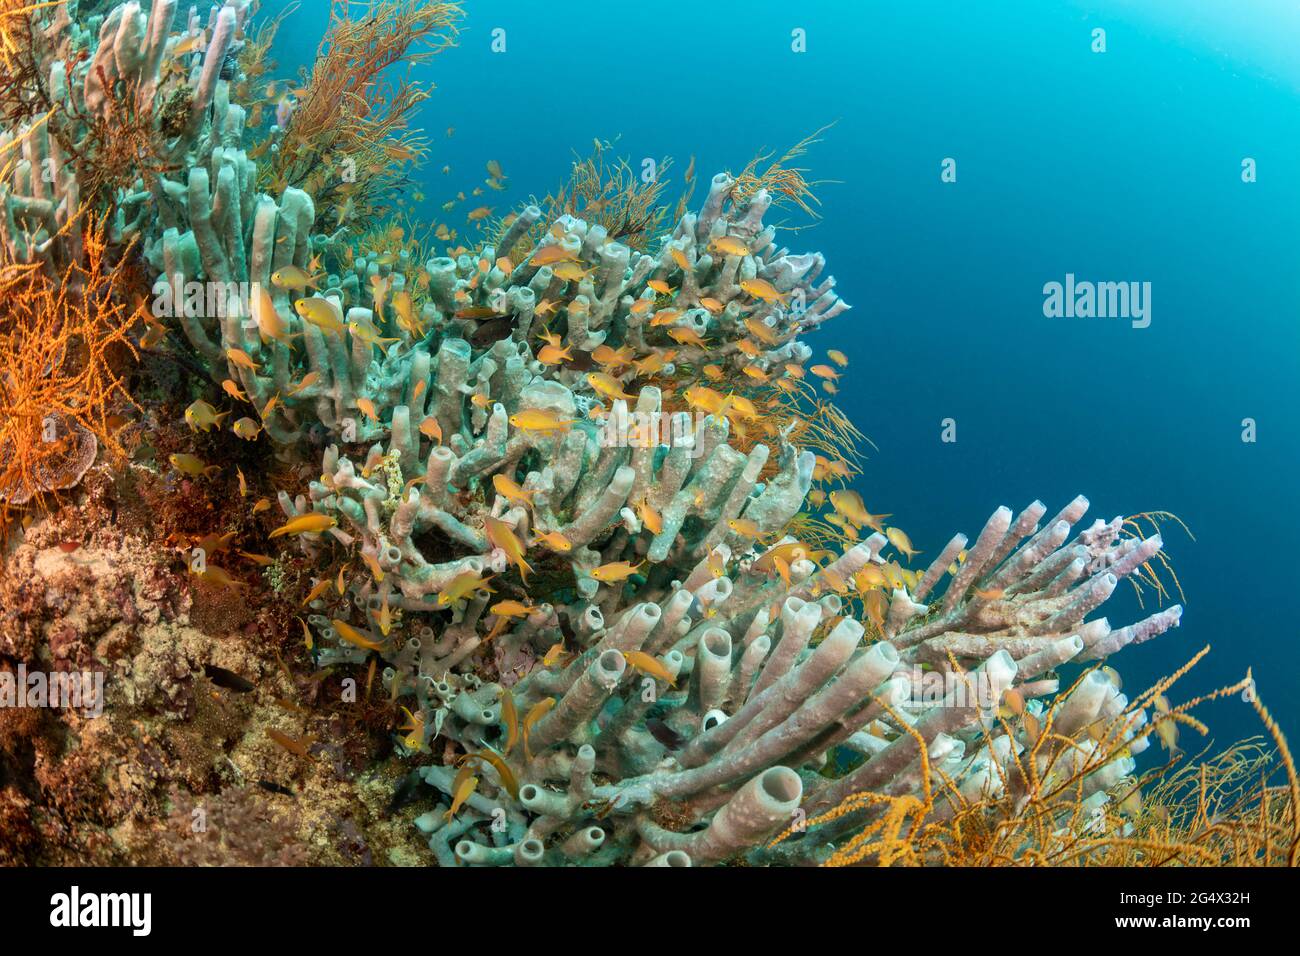 Anthias schooling around a huge colony of tube sponge, Cribrochalina olemda, clinging to a wall in the Philippines, Philippine Sea, Pacific Ocean, Asi Stock Photo